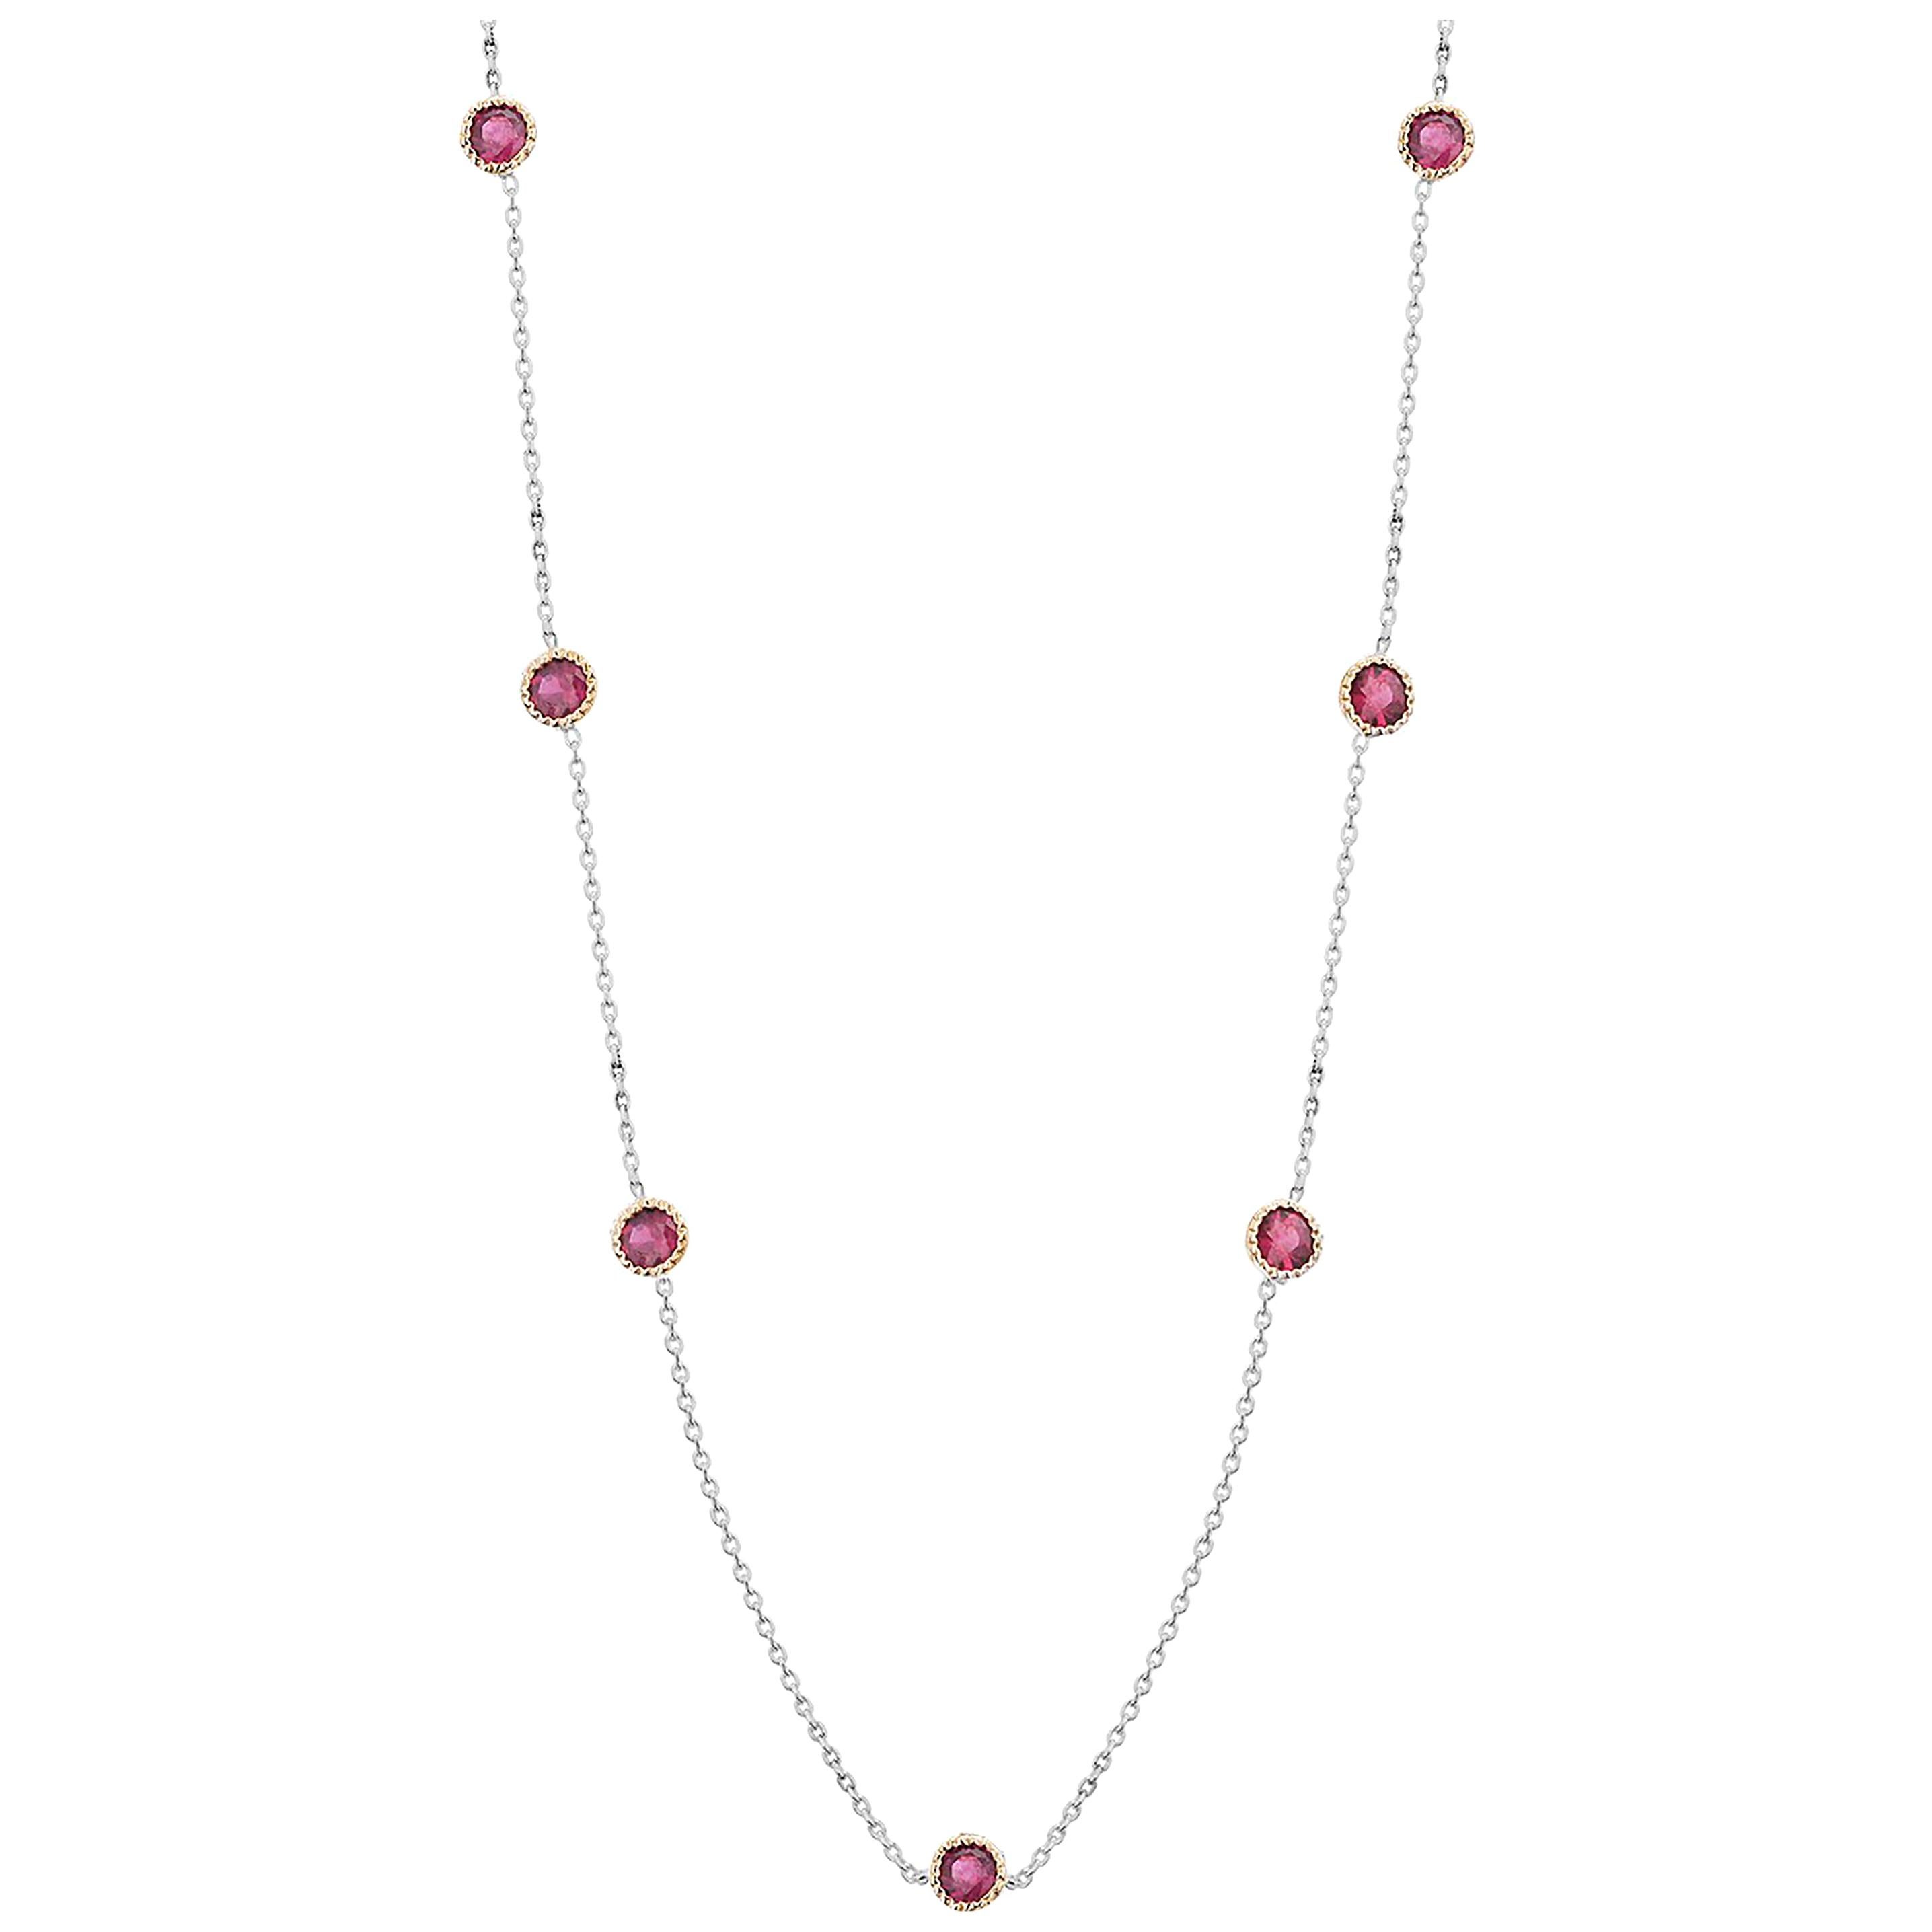 Seven Bezel-Set Round Ruby Yellow and White Gold Necklace